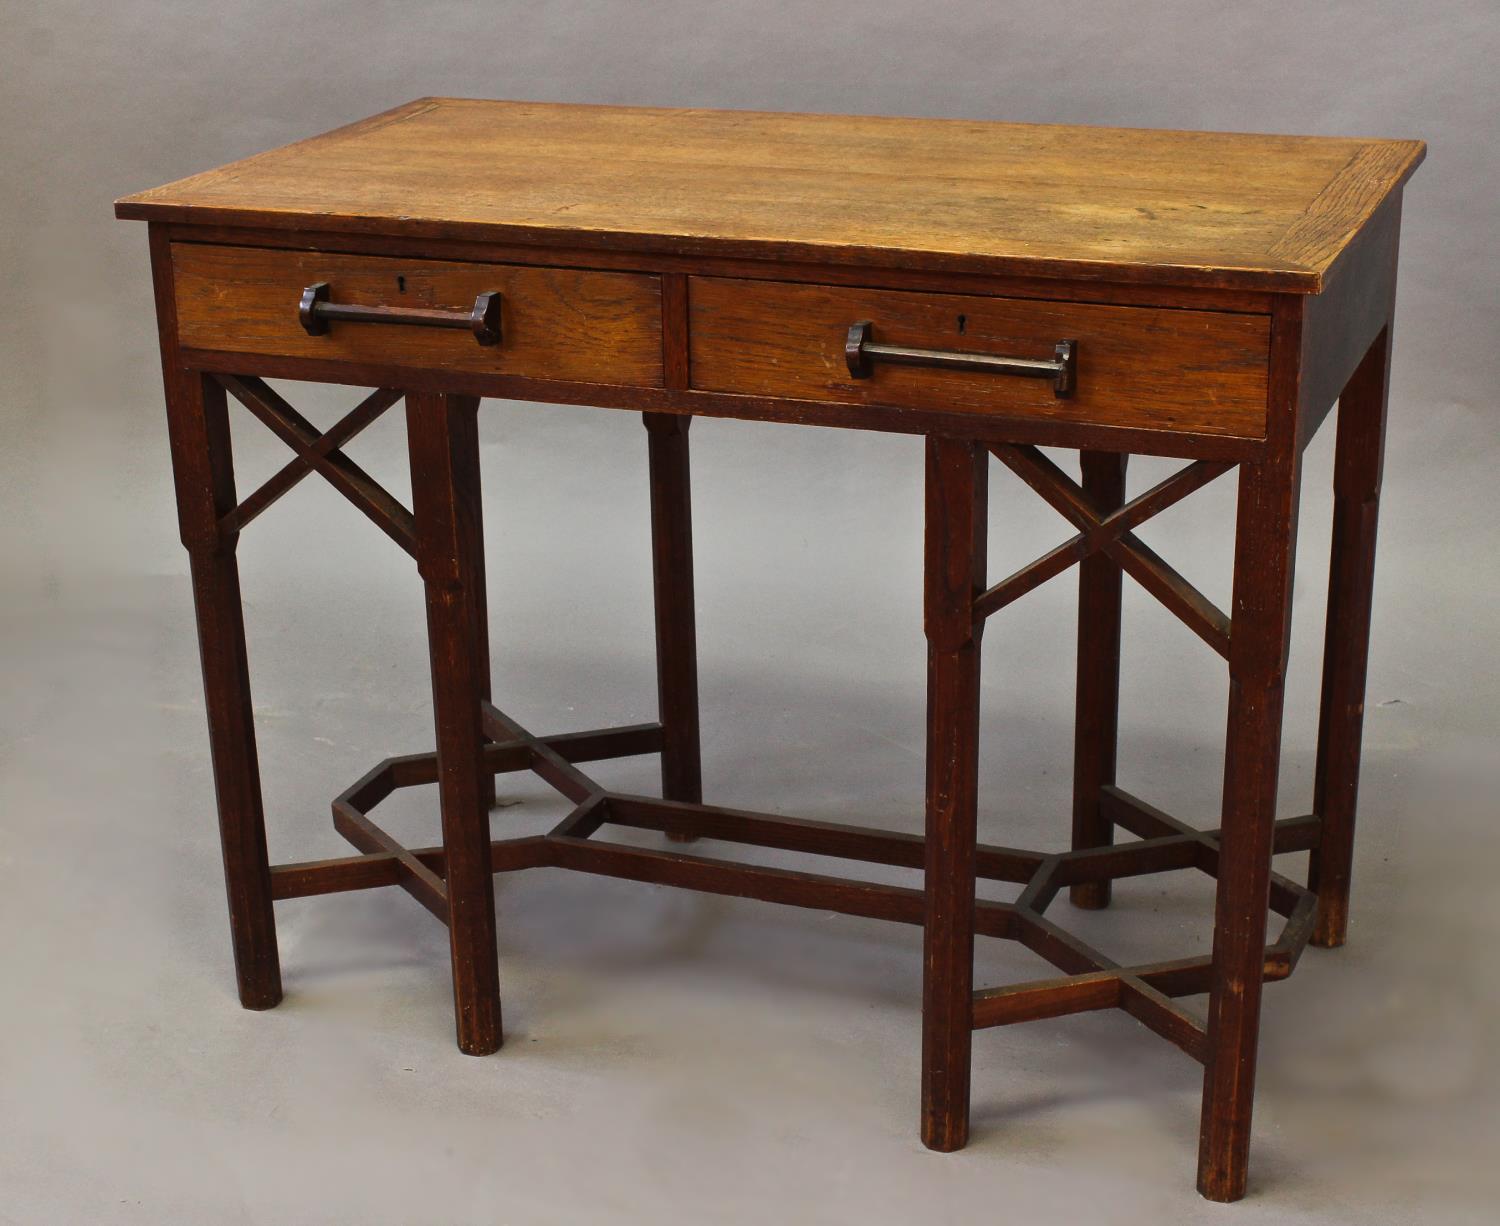 ARTS & CRAFTS SIDE TABLE an unusual table with two drawers and bar handles, supported on eight